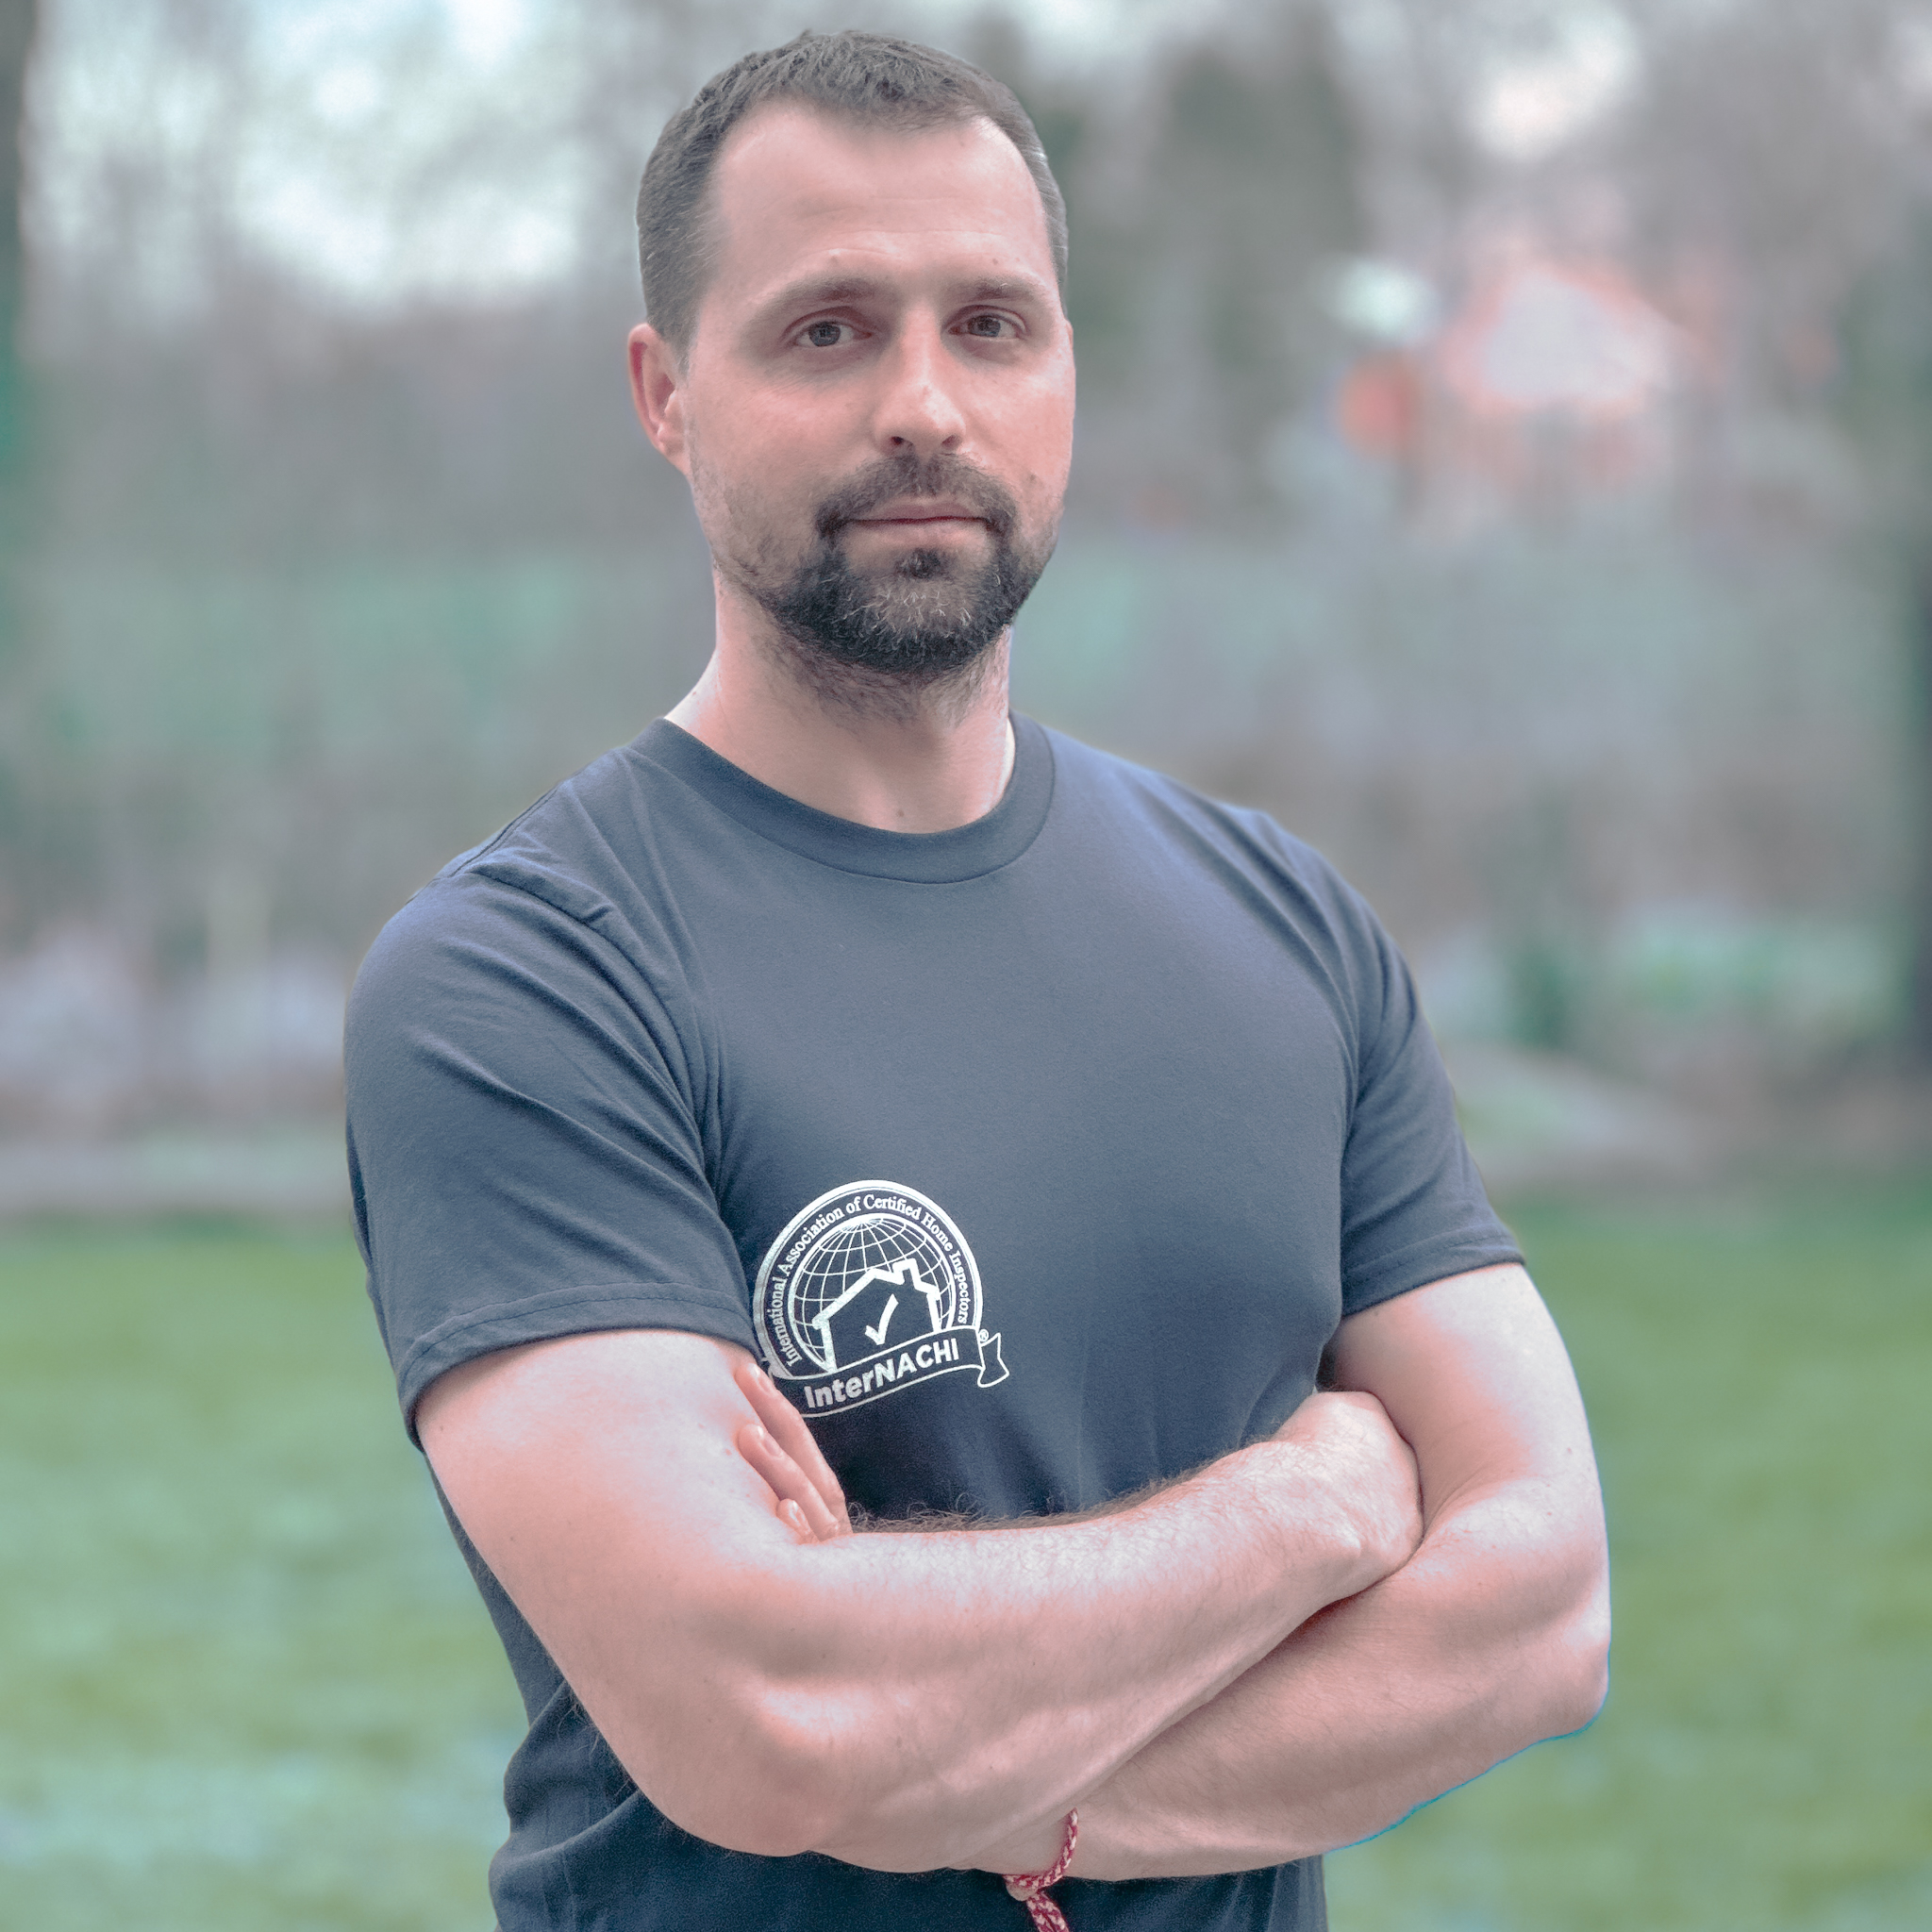 Valeri Georgiev, known as Val, stands confidently with his arms crossed. He's wearing a black T-shirt with the InterNACHI logo, symbolizing his certified expertise as a home inspector. Behind him is a soft-focus view of a residential area, reflecting his real estate industry background and property investment experience. His expression is serious and professional, indicative of his meticulous approach to home inspections and commitment to providing thorough service with the latest techniques and technology.